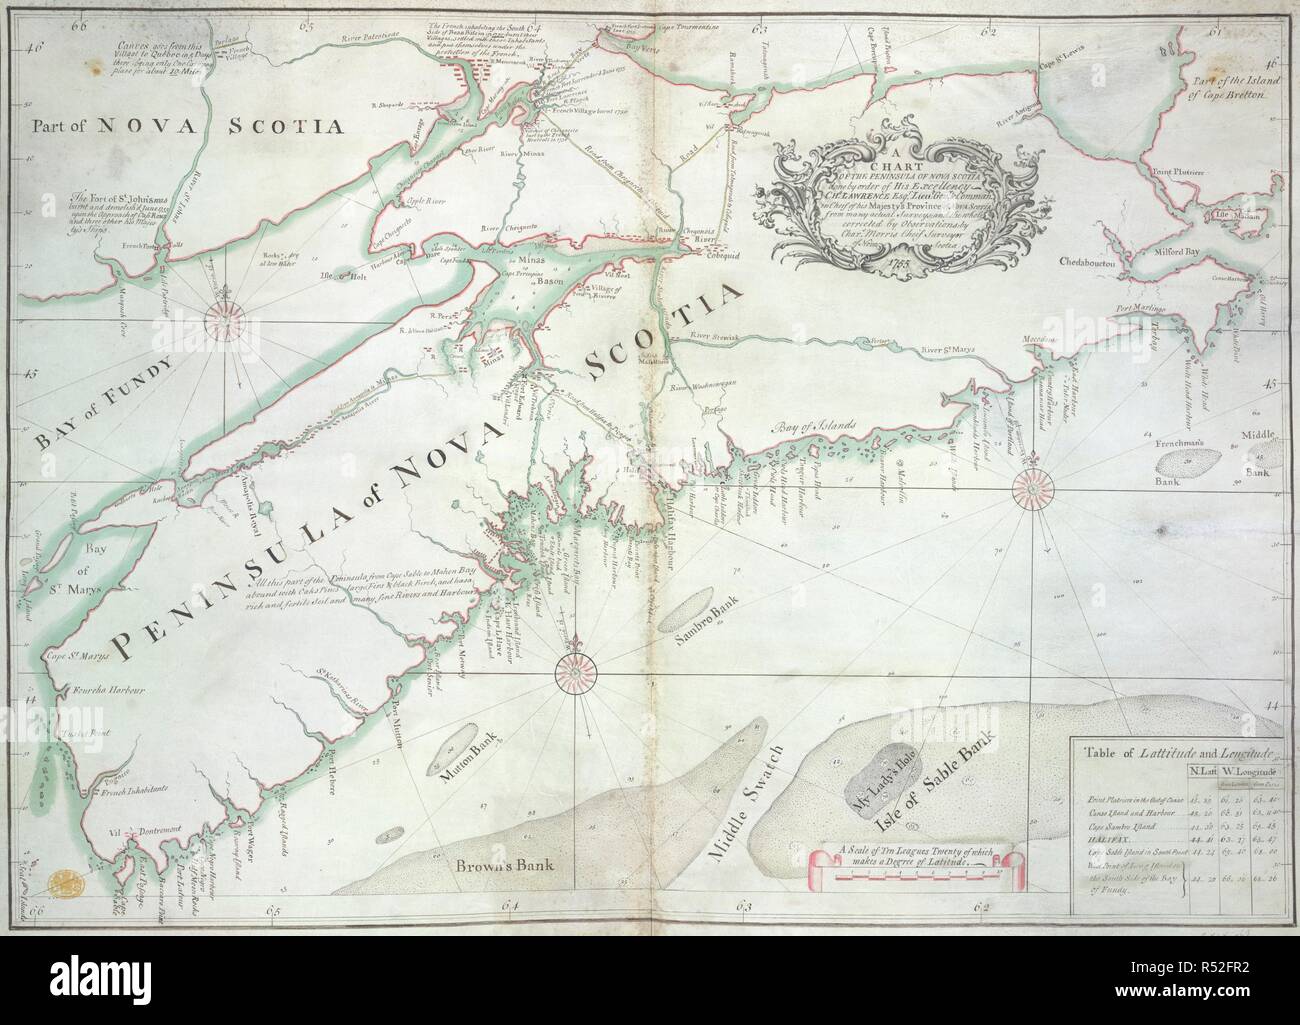 A chart of the peninsula of Nova Scotia. A CHART OF THE PENINSULA OF NOVA SCOTIA / done by order of His Excellency CHS. LAWRENCE Esqr. Lieut. Govr. & Commr. in Chief of his Majesty's Province of NOVA SCOTIA from many actual Surveys; and the whole corrected by Observations: by Chars. Morris Chief Surveyor of Nova Scotia 1755. [Halifax?] : by Chars. Morris Chief Surveyor of Nova Scotia, 1755. Source: Maps K.Top.119.57. Language: English. Stock Photo